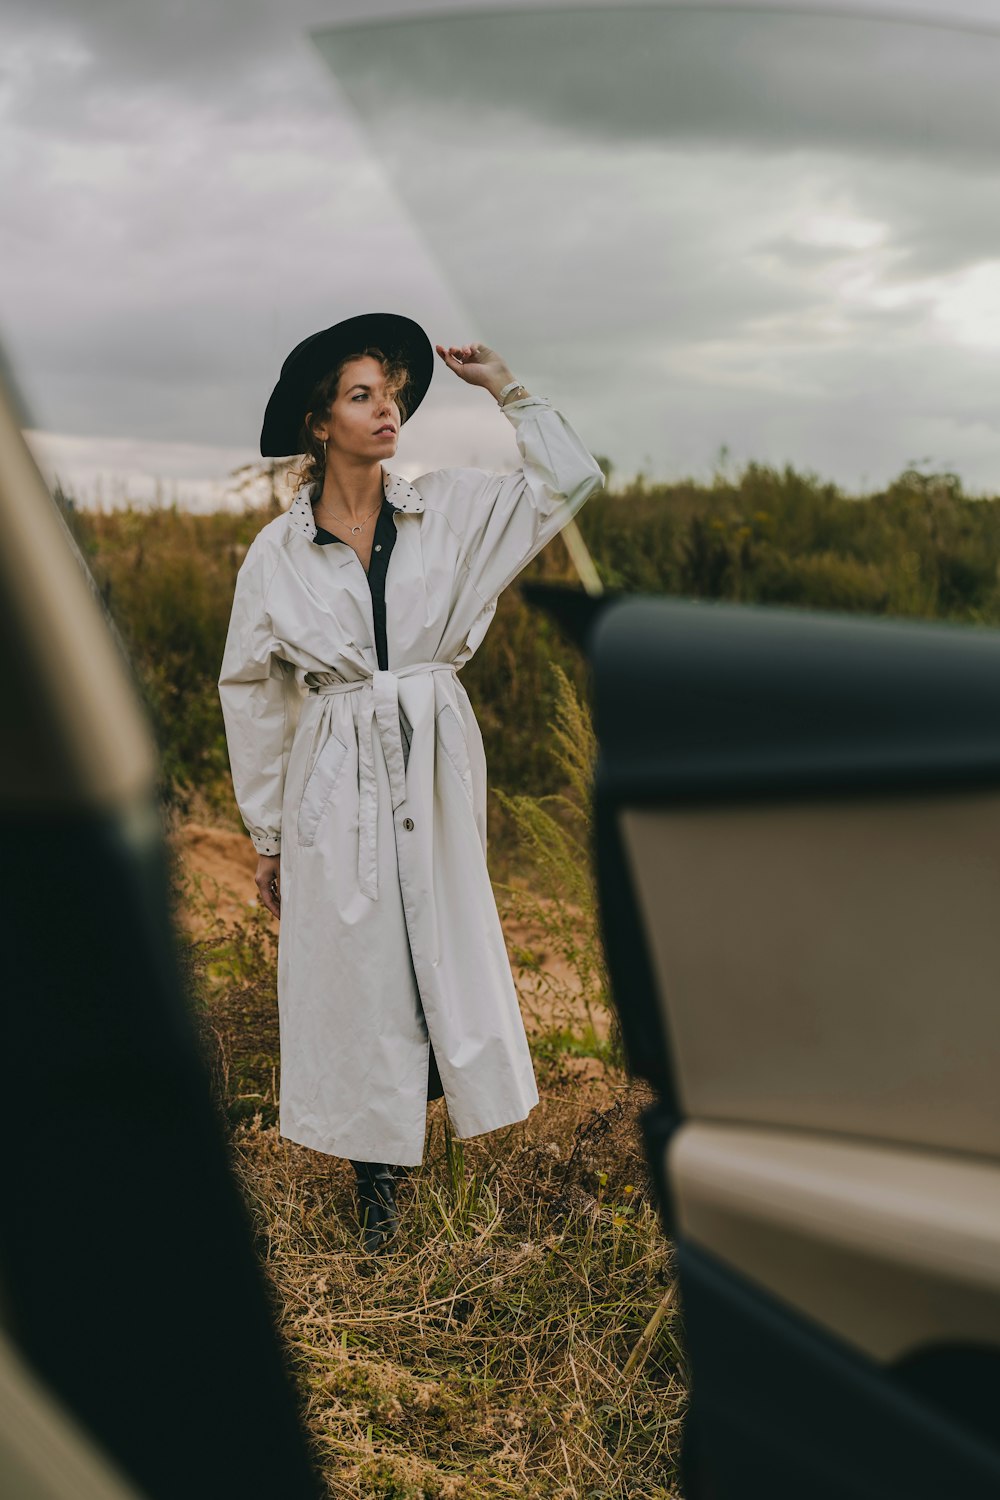 a woman in a white coat and hat standing next to a car